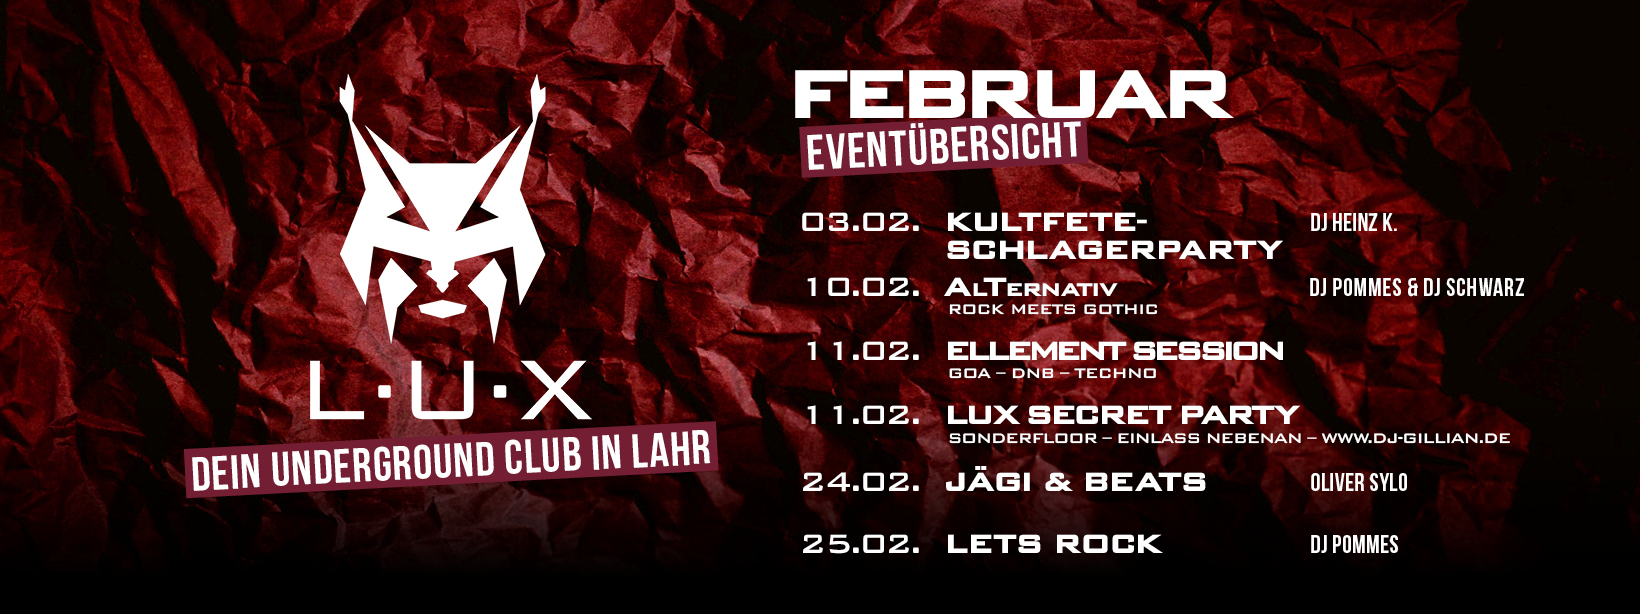 Februar - Events - Lux